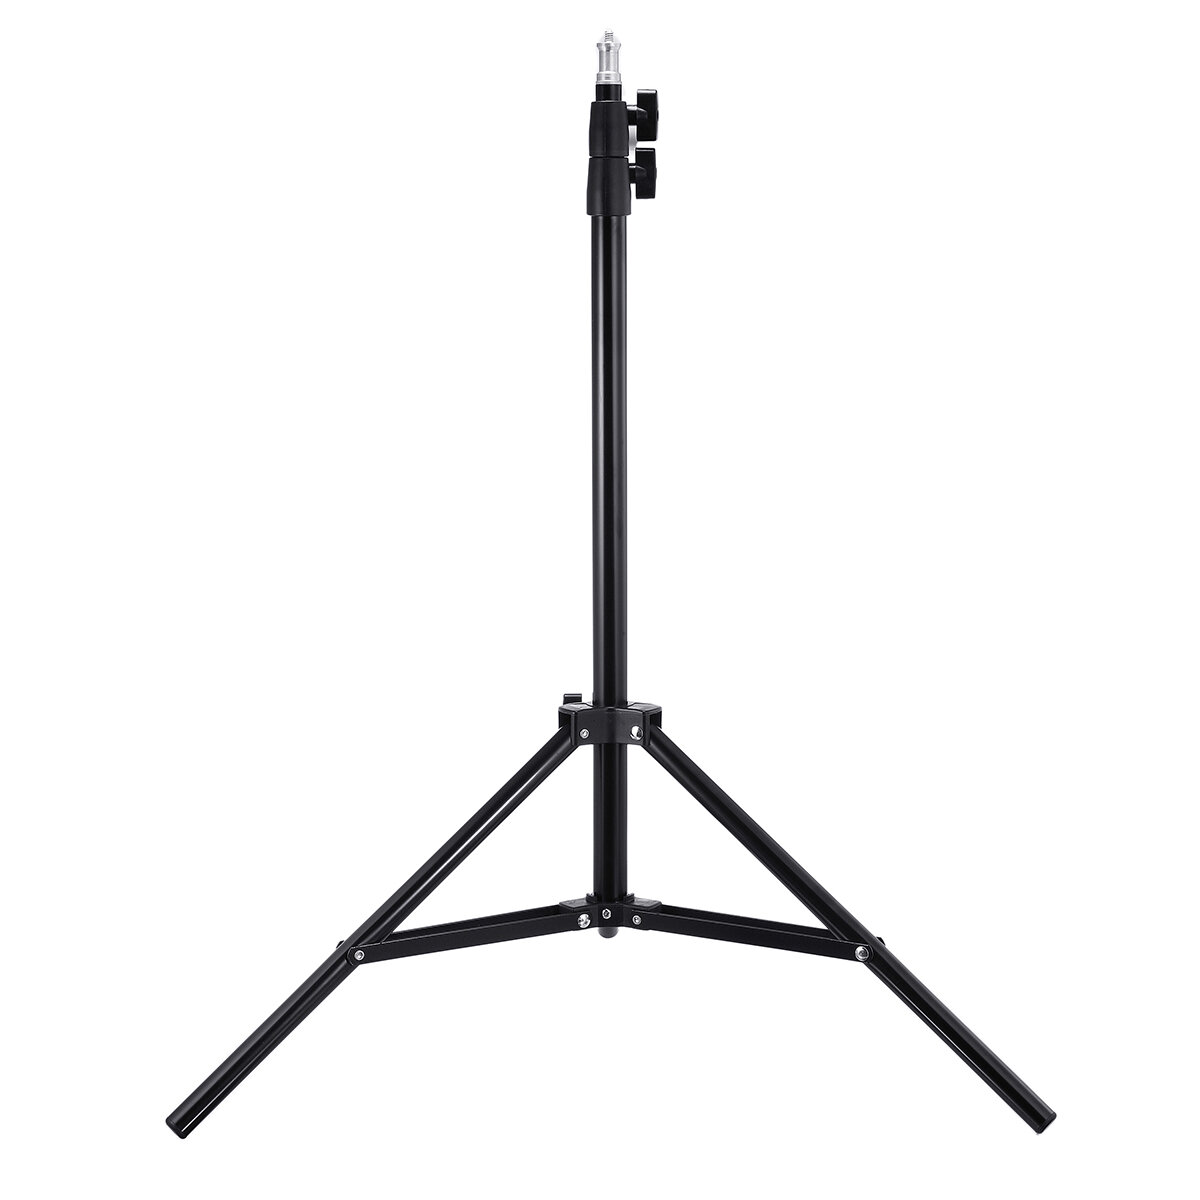 

200cm Retractable Aluminum Alloy Mobile Phone Live Bracket Camera Tripod Photography Light Stand Flash Stand